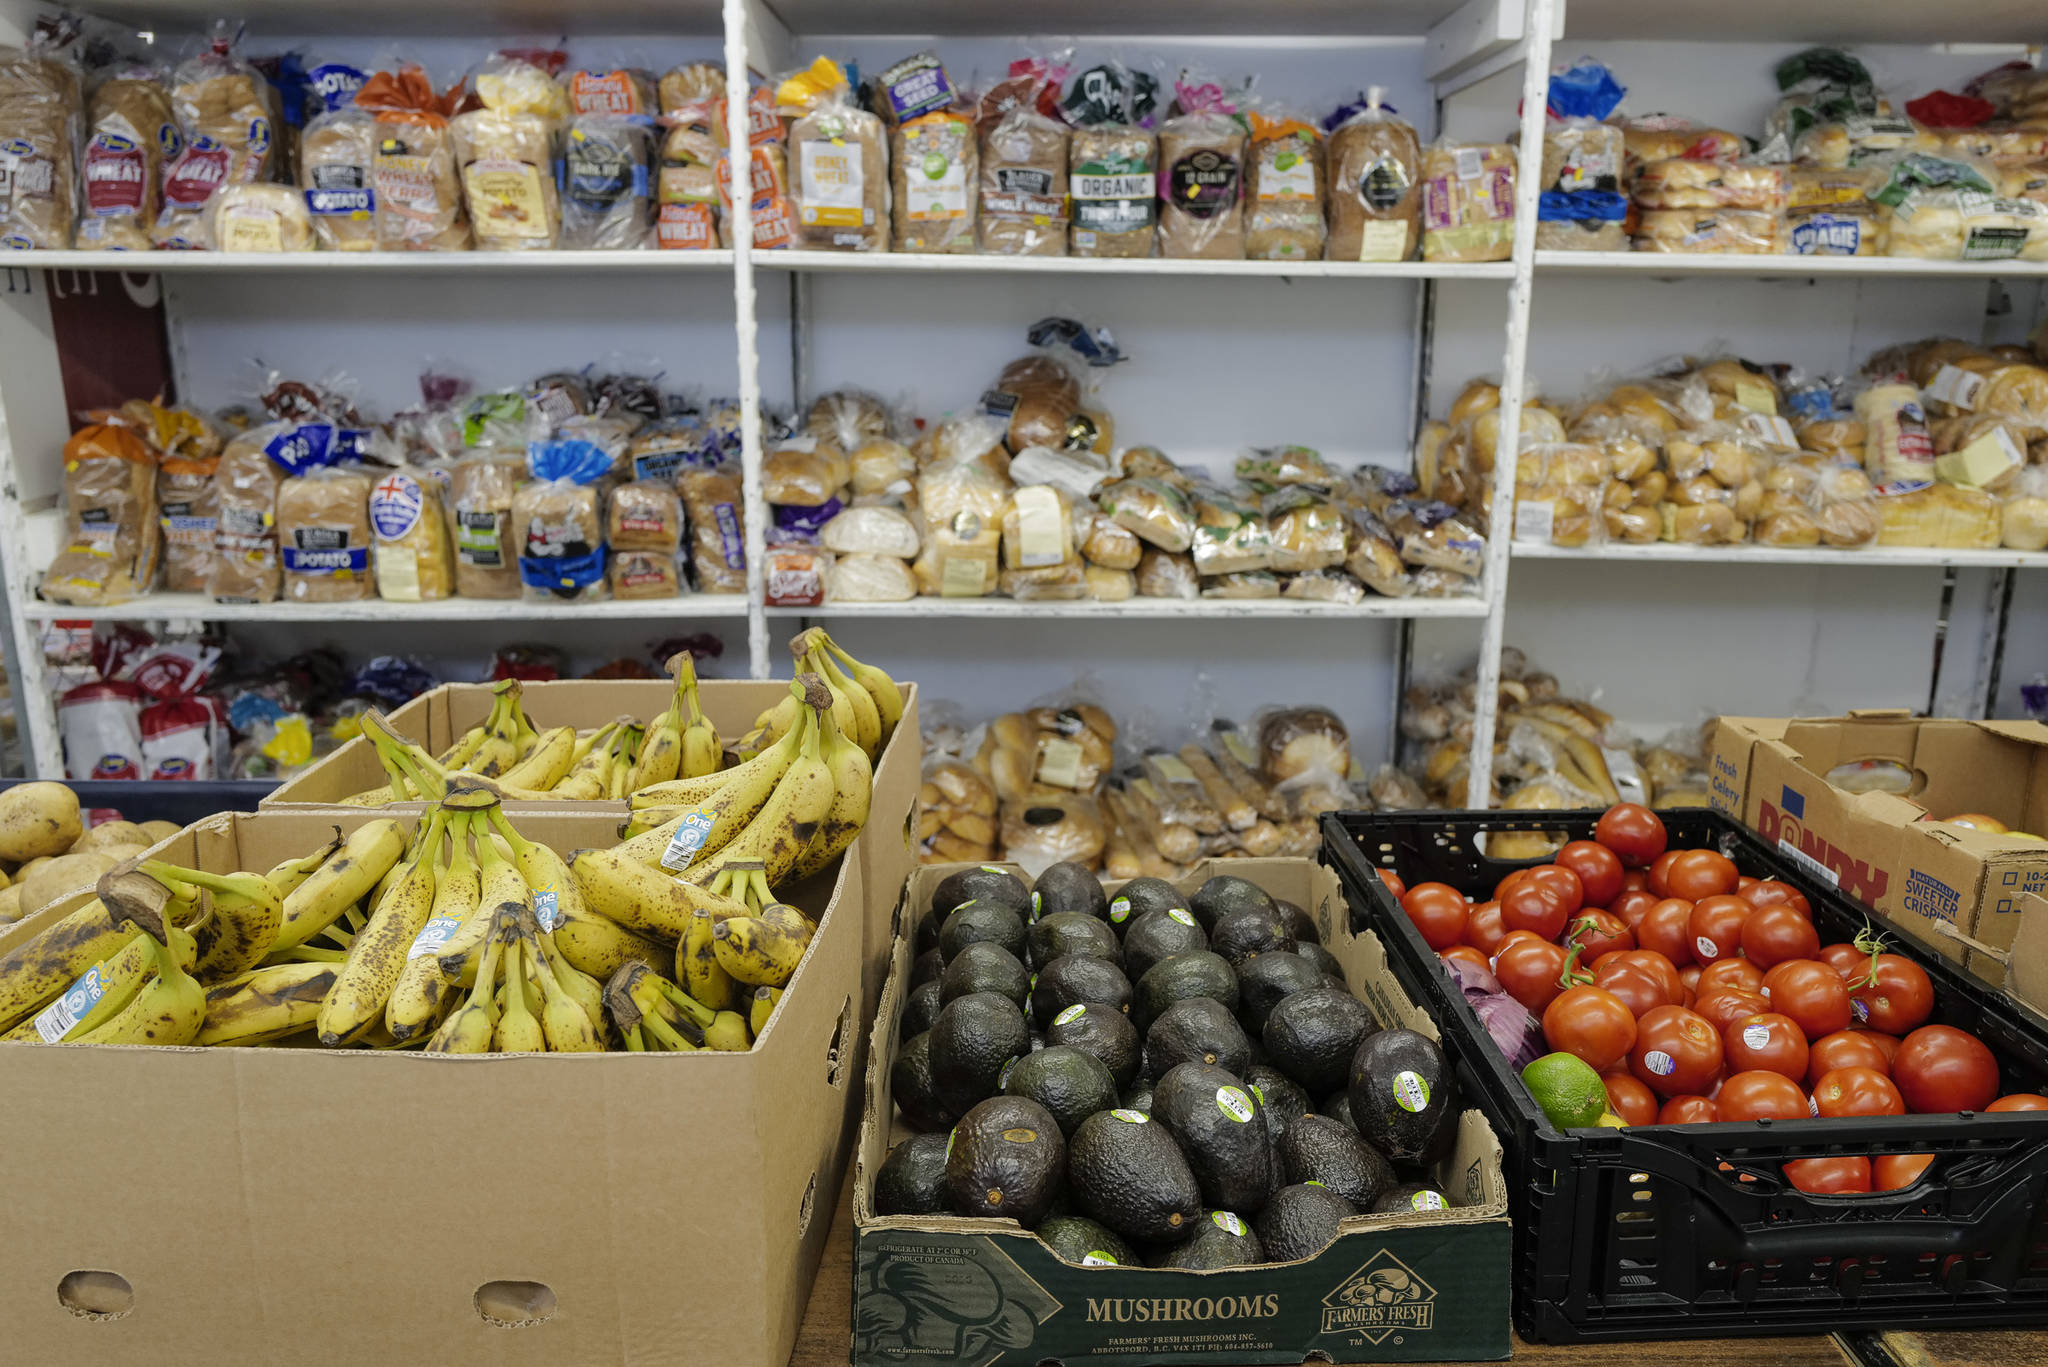 Fresh produce and bread were on hand at the Southeast Alaska Food Bank on Crazy Horse Drive on Tuesday, Oct. 15, 2019. (Michael Penn | Juneau Empire File)